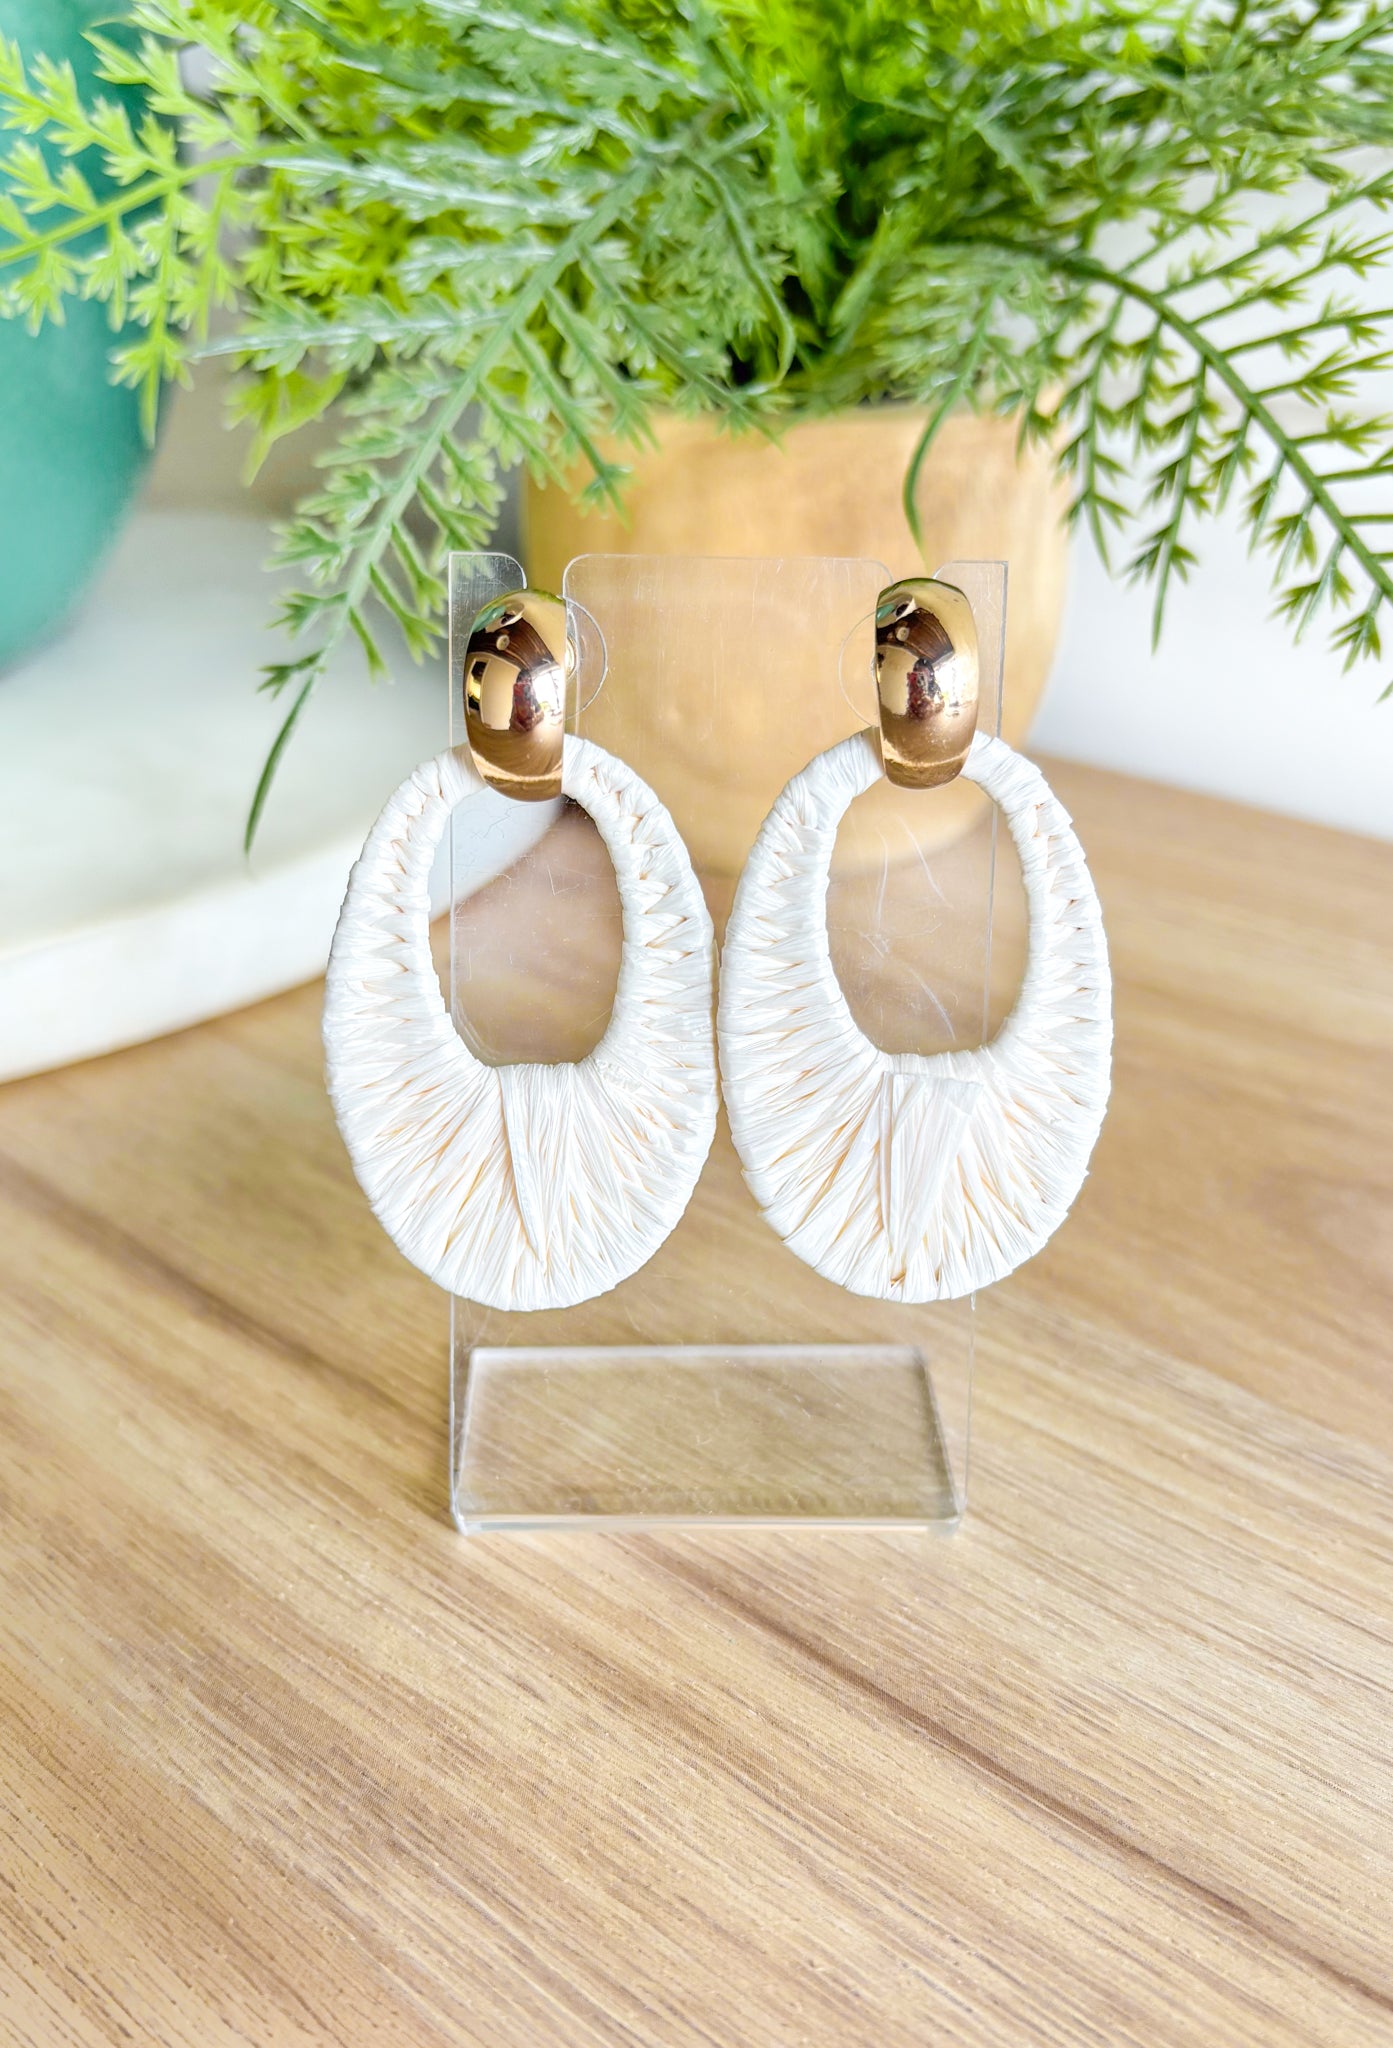 Take A Chance Earrings in Ivory, small gold hoop with white raffia wrapped oval ring 